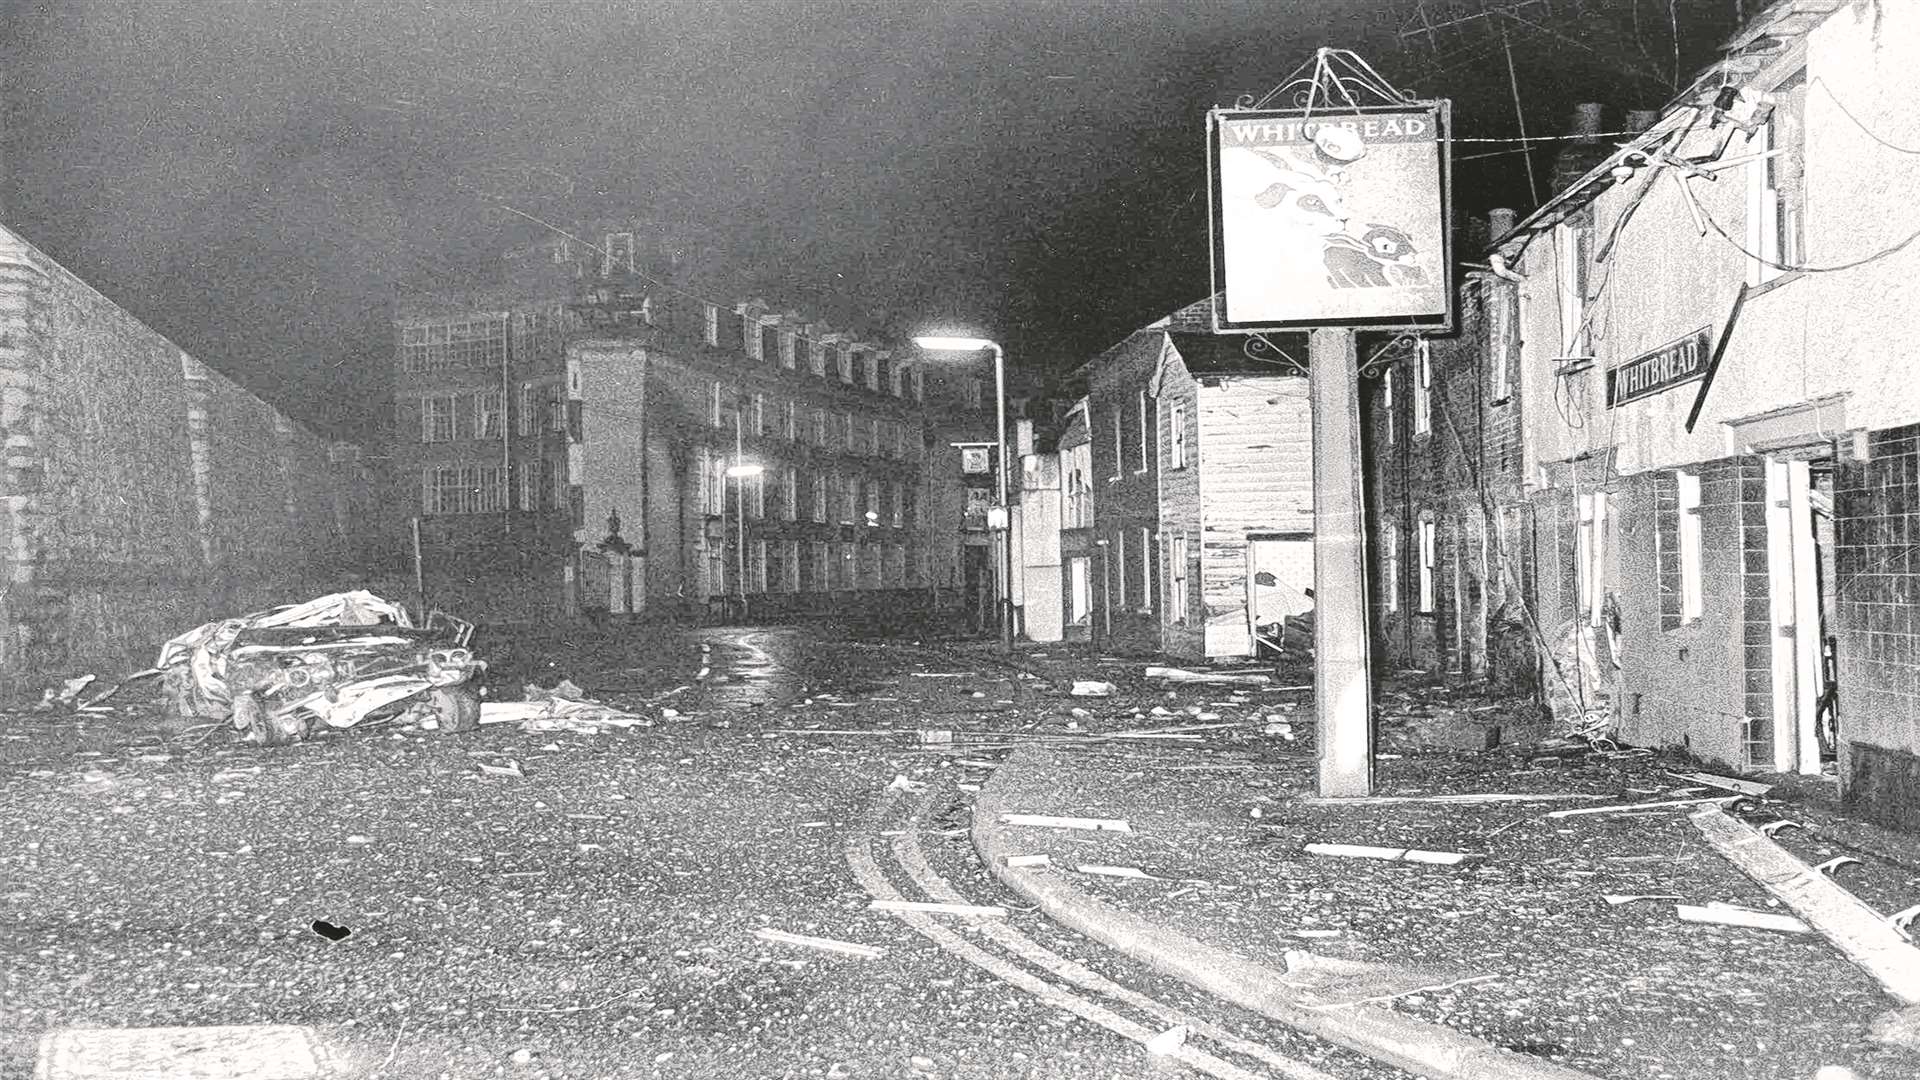 Bombing of the Hare & Hounds public house, Maidstone - 25th September, 1975